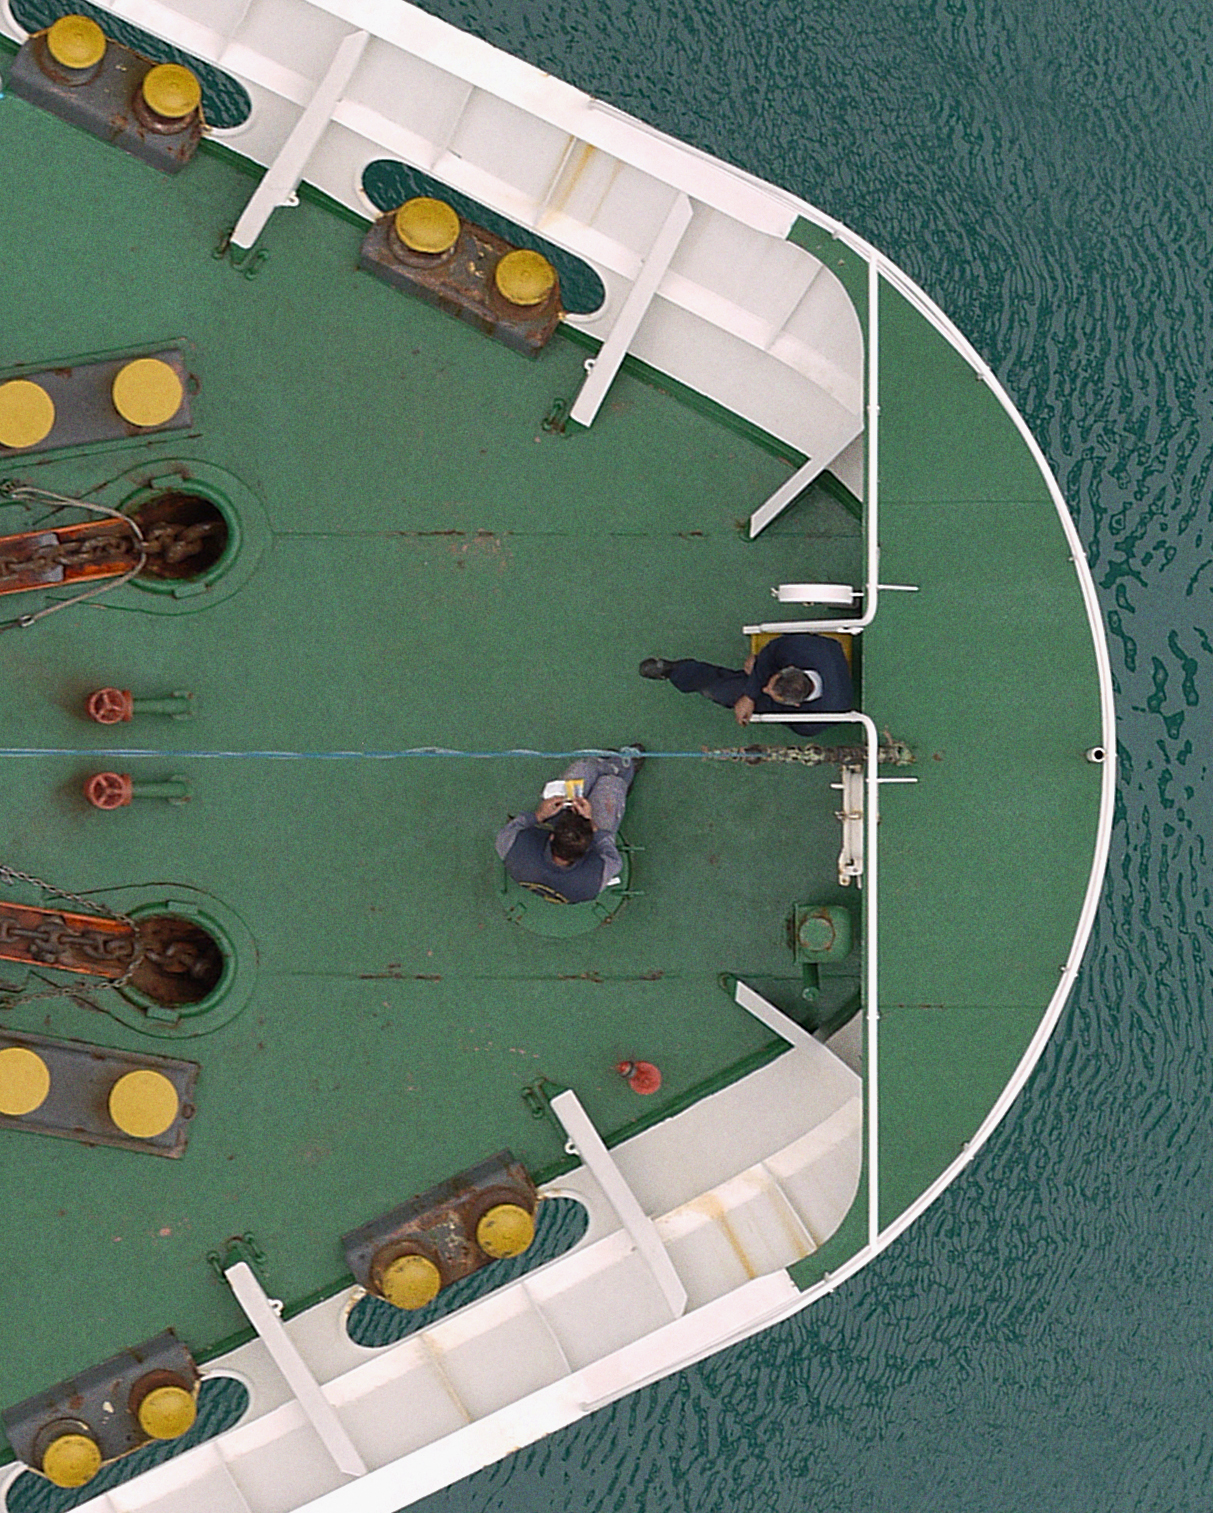 Inspect The Detailed Geometry Of Ships In These High-Res Photos